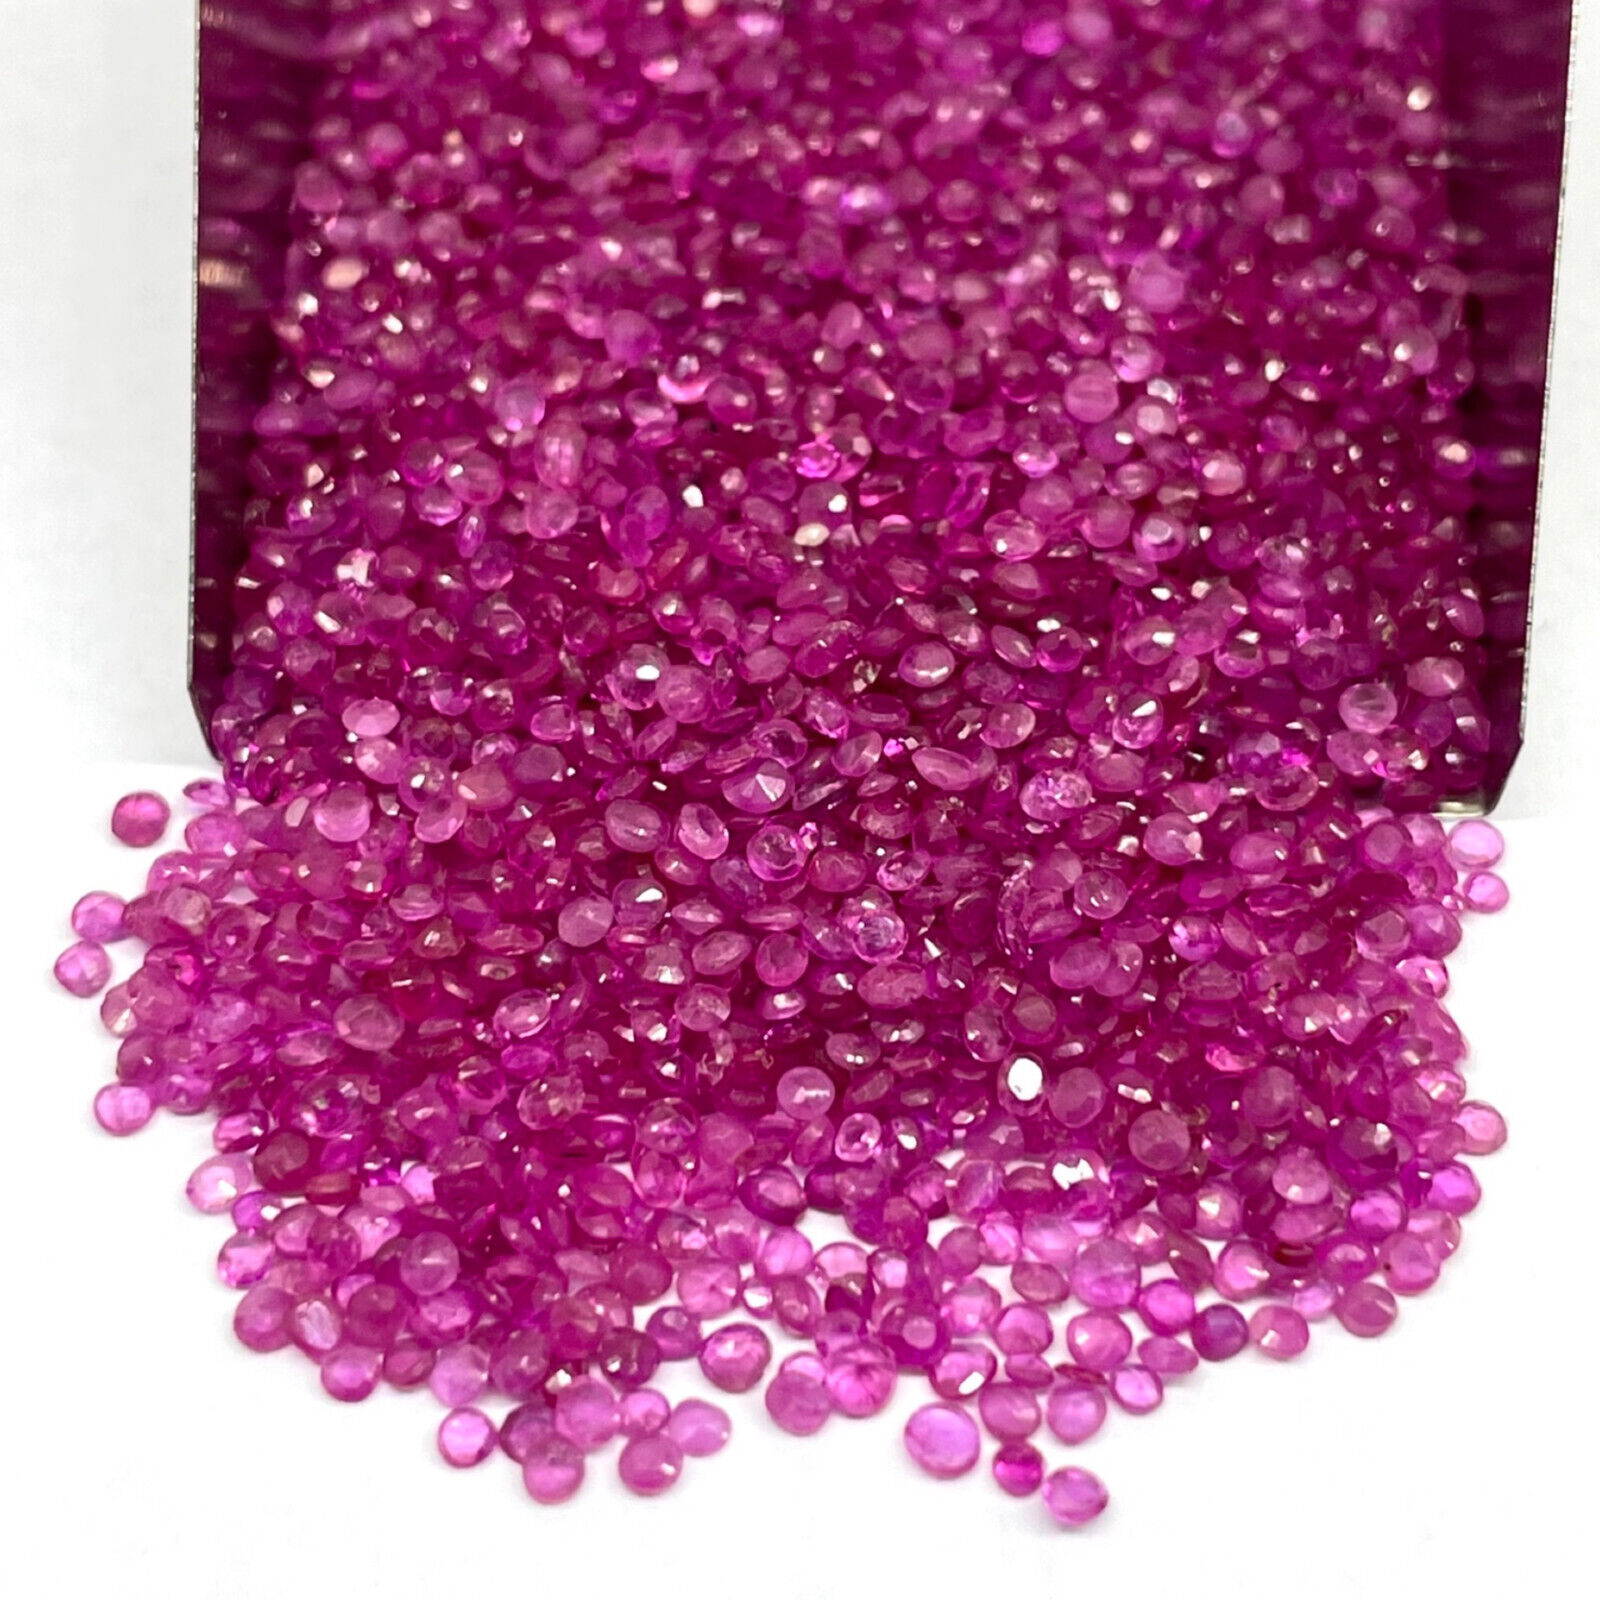 100 Pc Natural Ruby Round Cut Pinkish Red Loose Gemstone Wholesale Lot 1.2mm-2mm Selene Gems